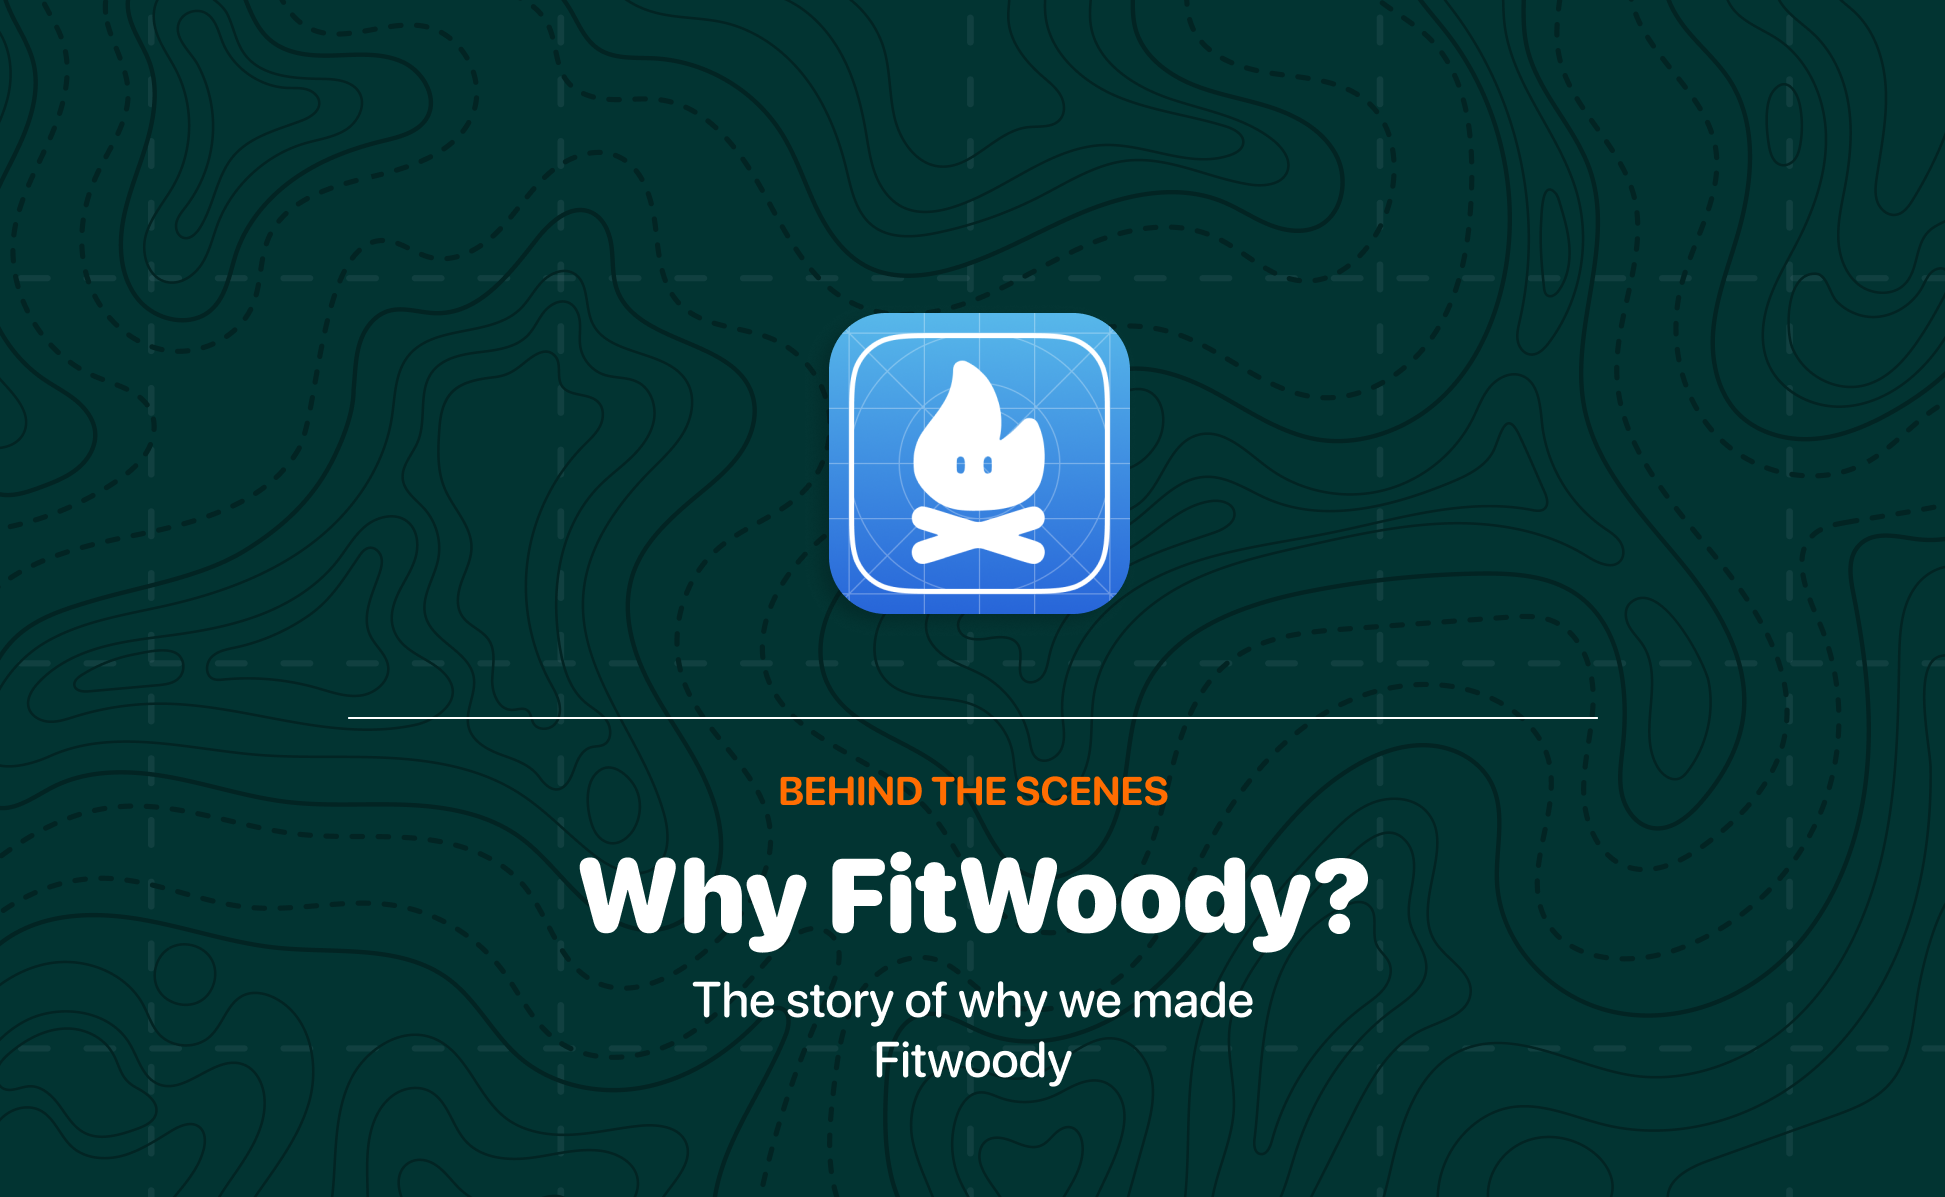 FitWoody History